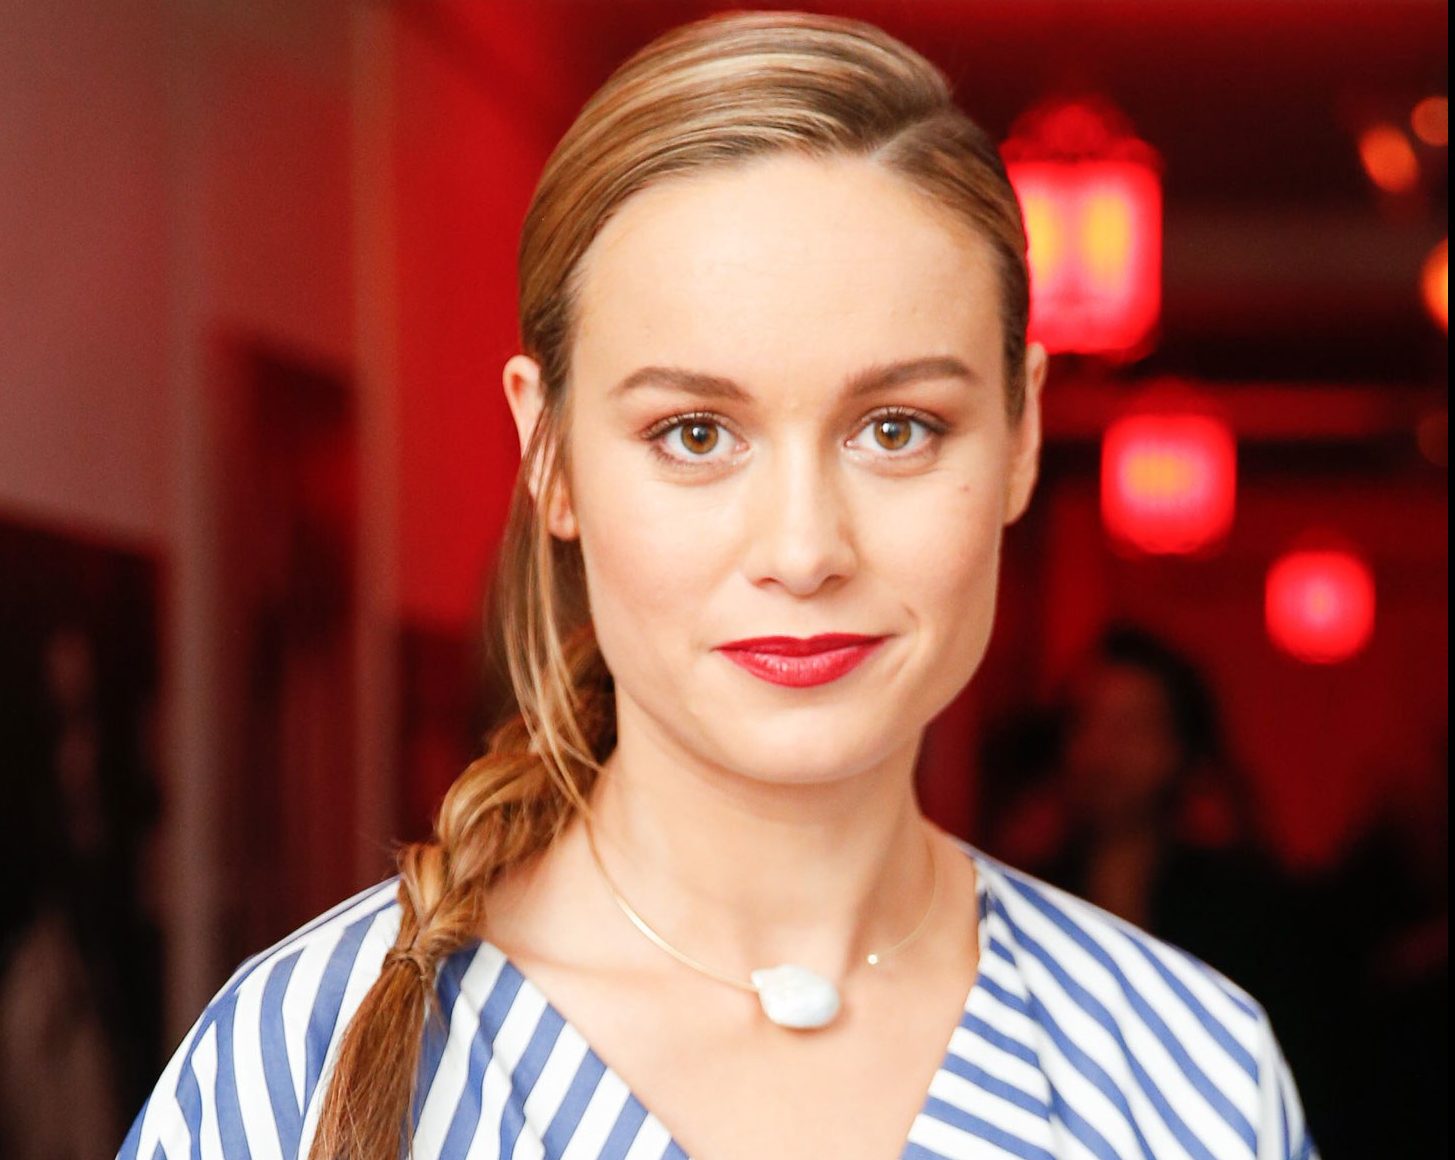 Can You Match These Actors With Their Starring Roles? 2 brie larson